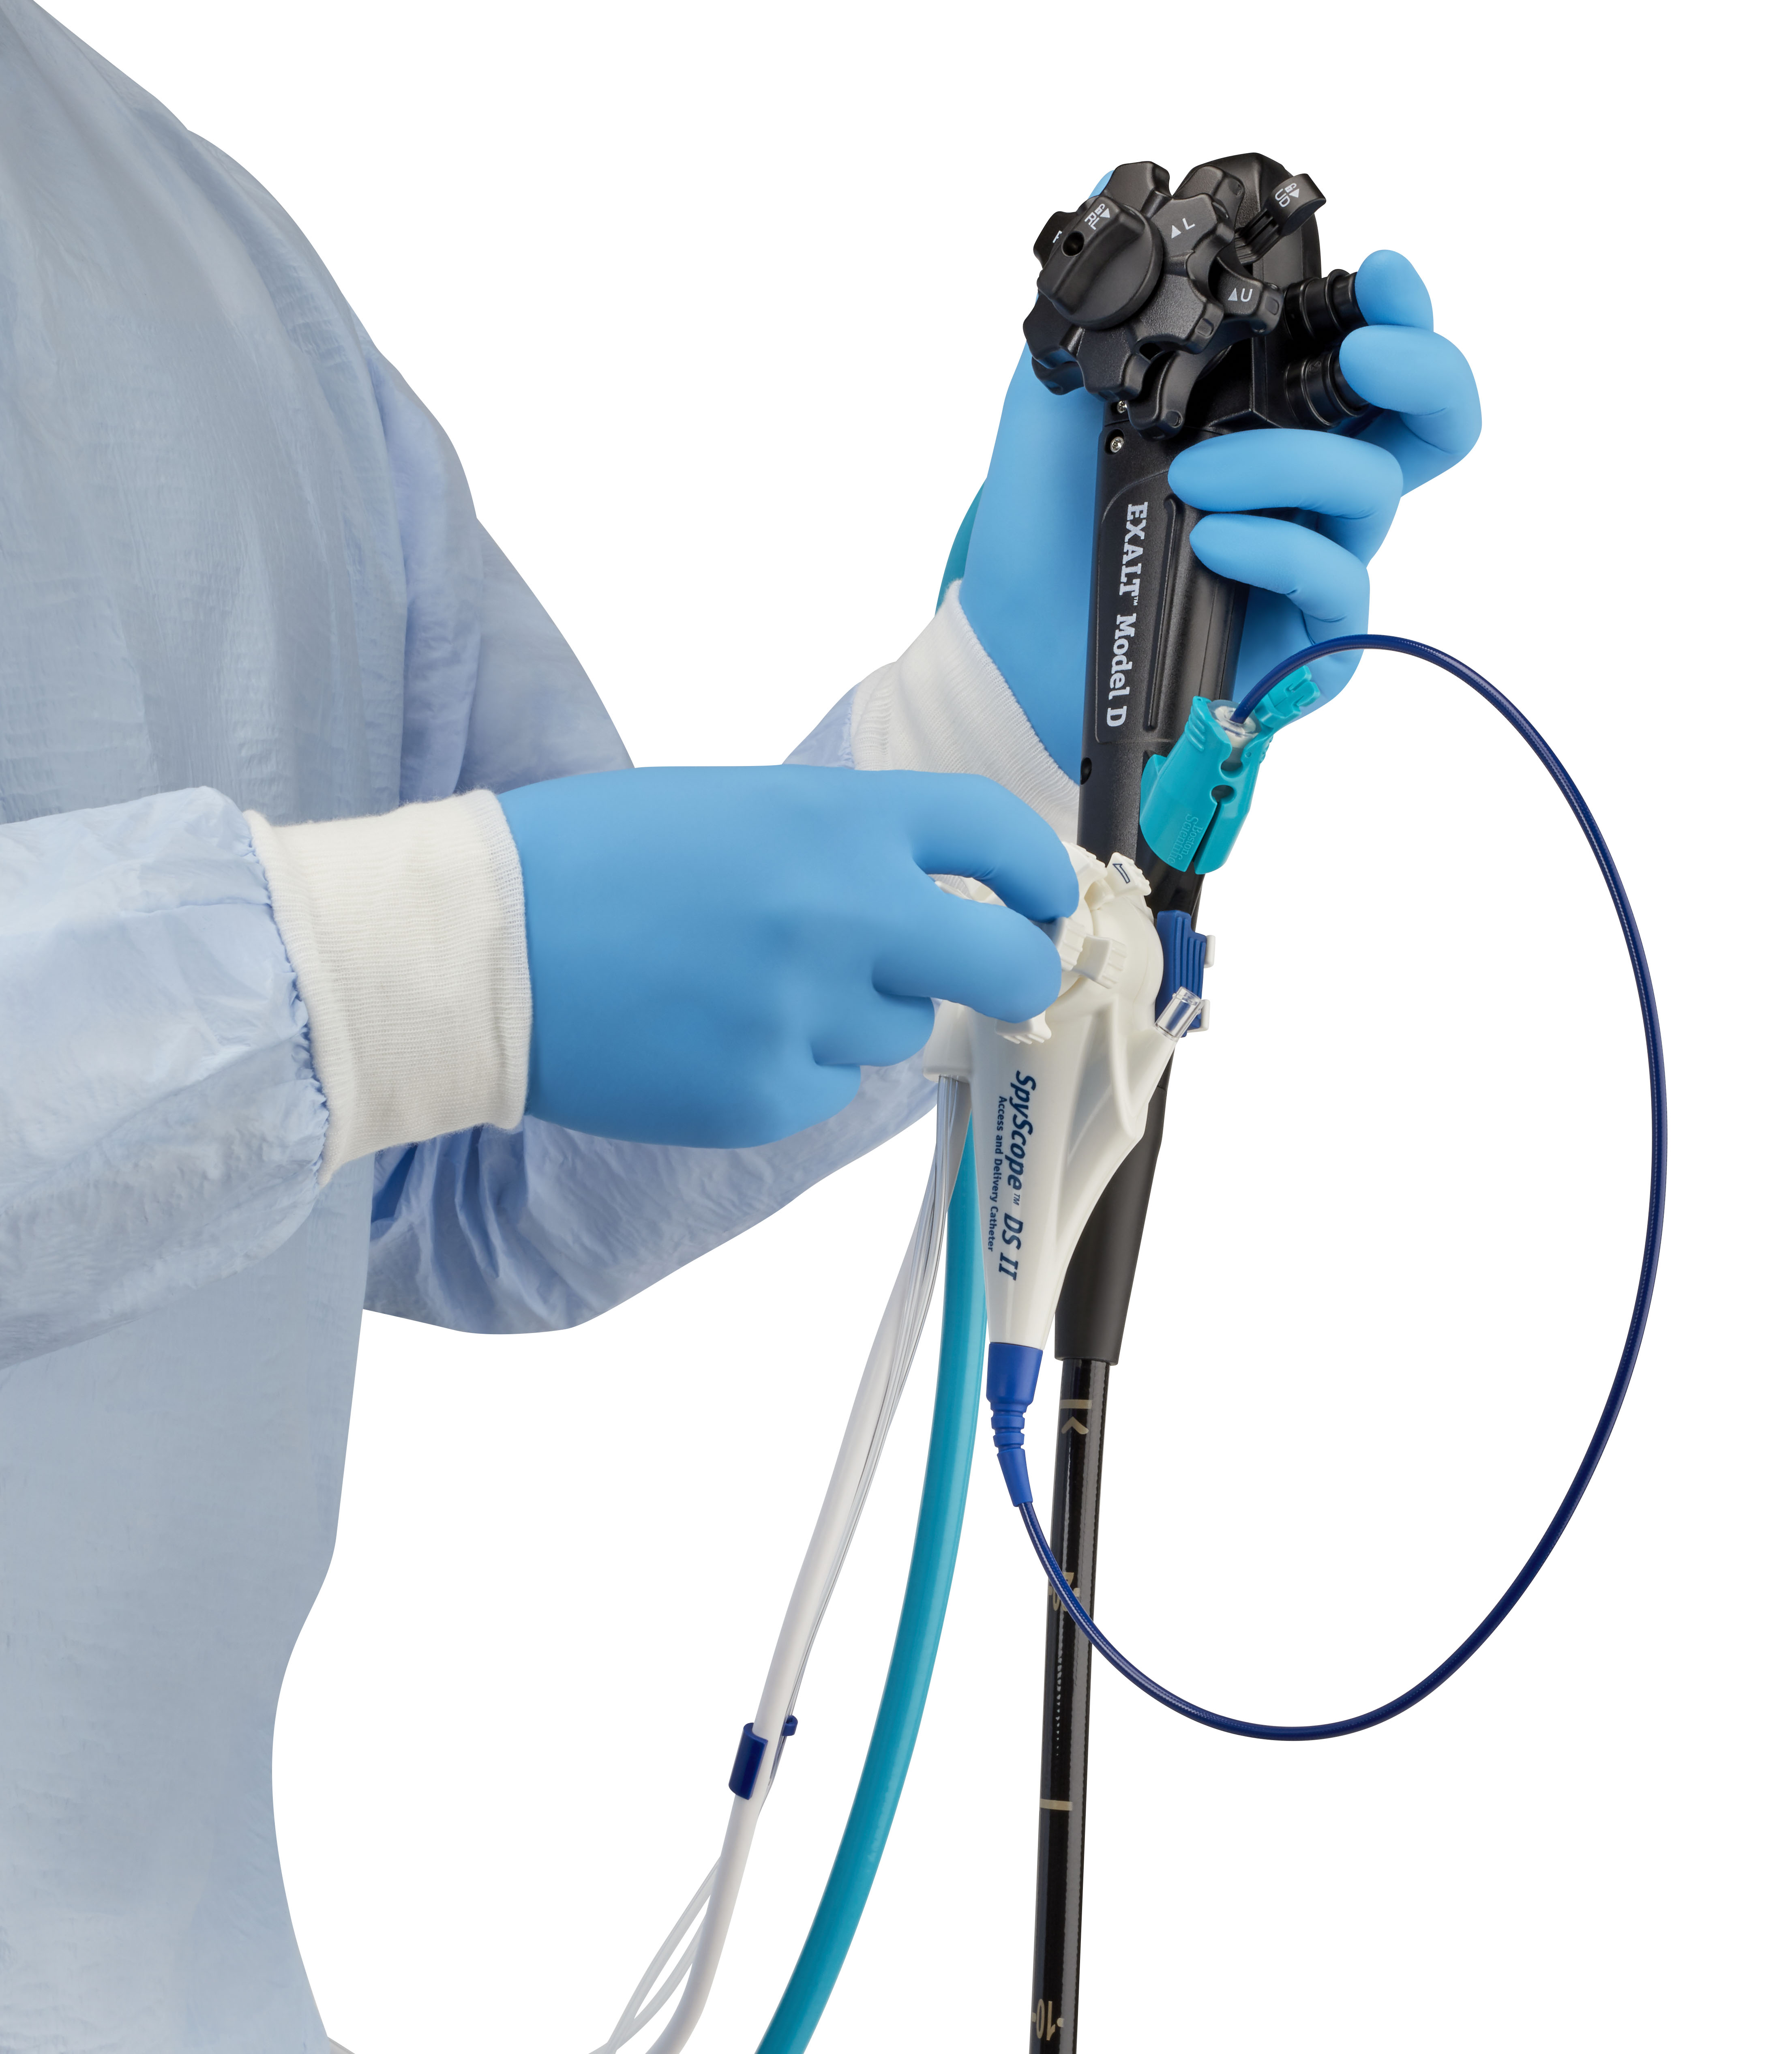 EXALT Model D Single-Use Duodenoscope, Generation 3 with the SpyGlass™ DS System with Sight Shield Technology 